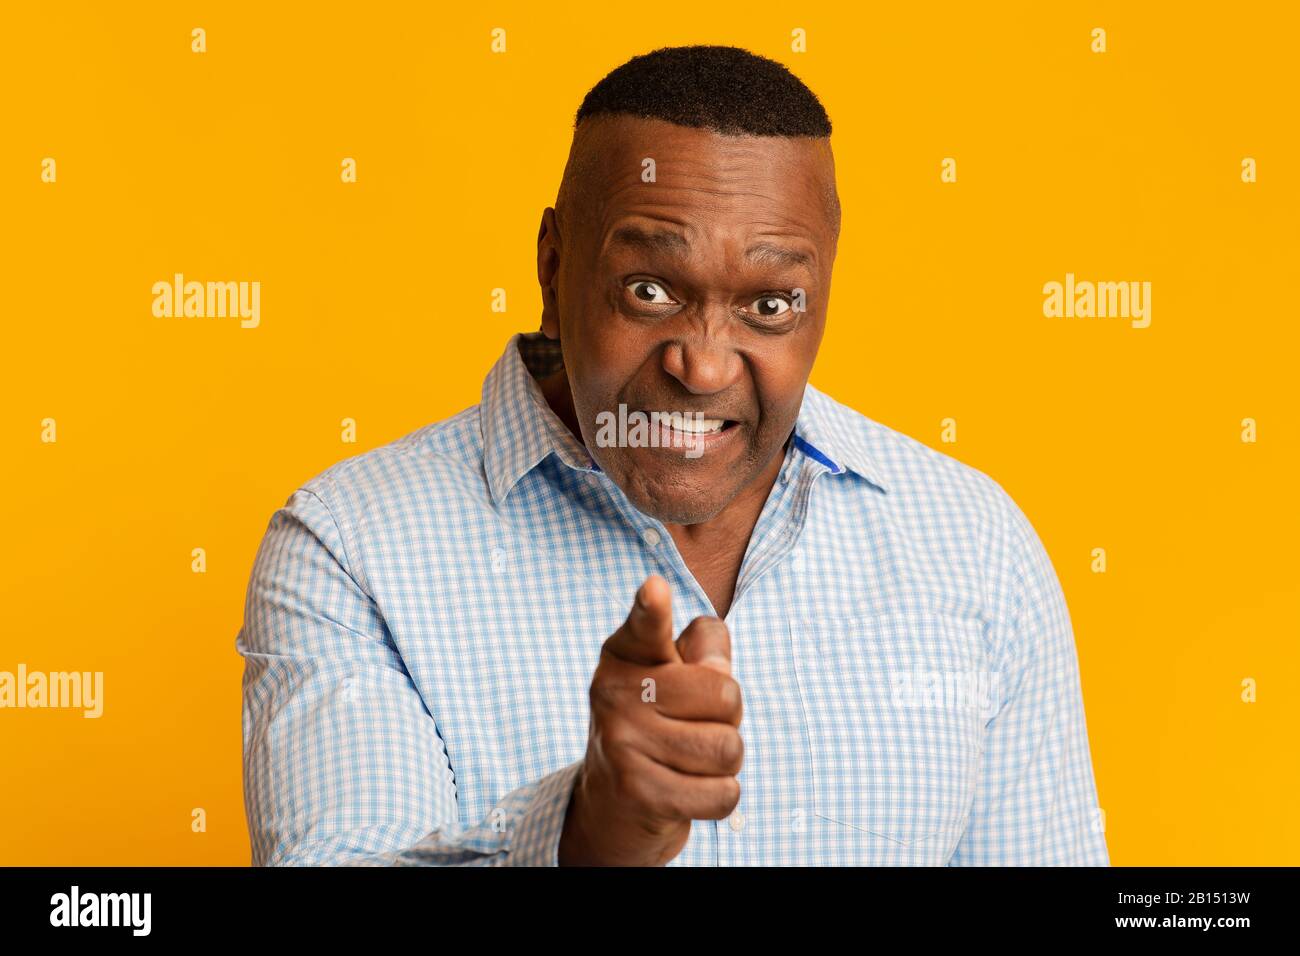 Angry middle aged african american man pointing at camera Stock Photo